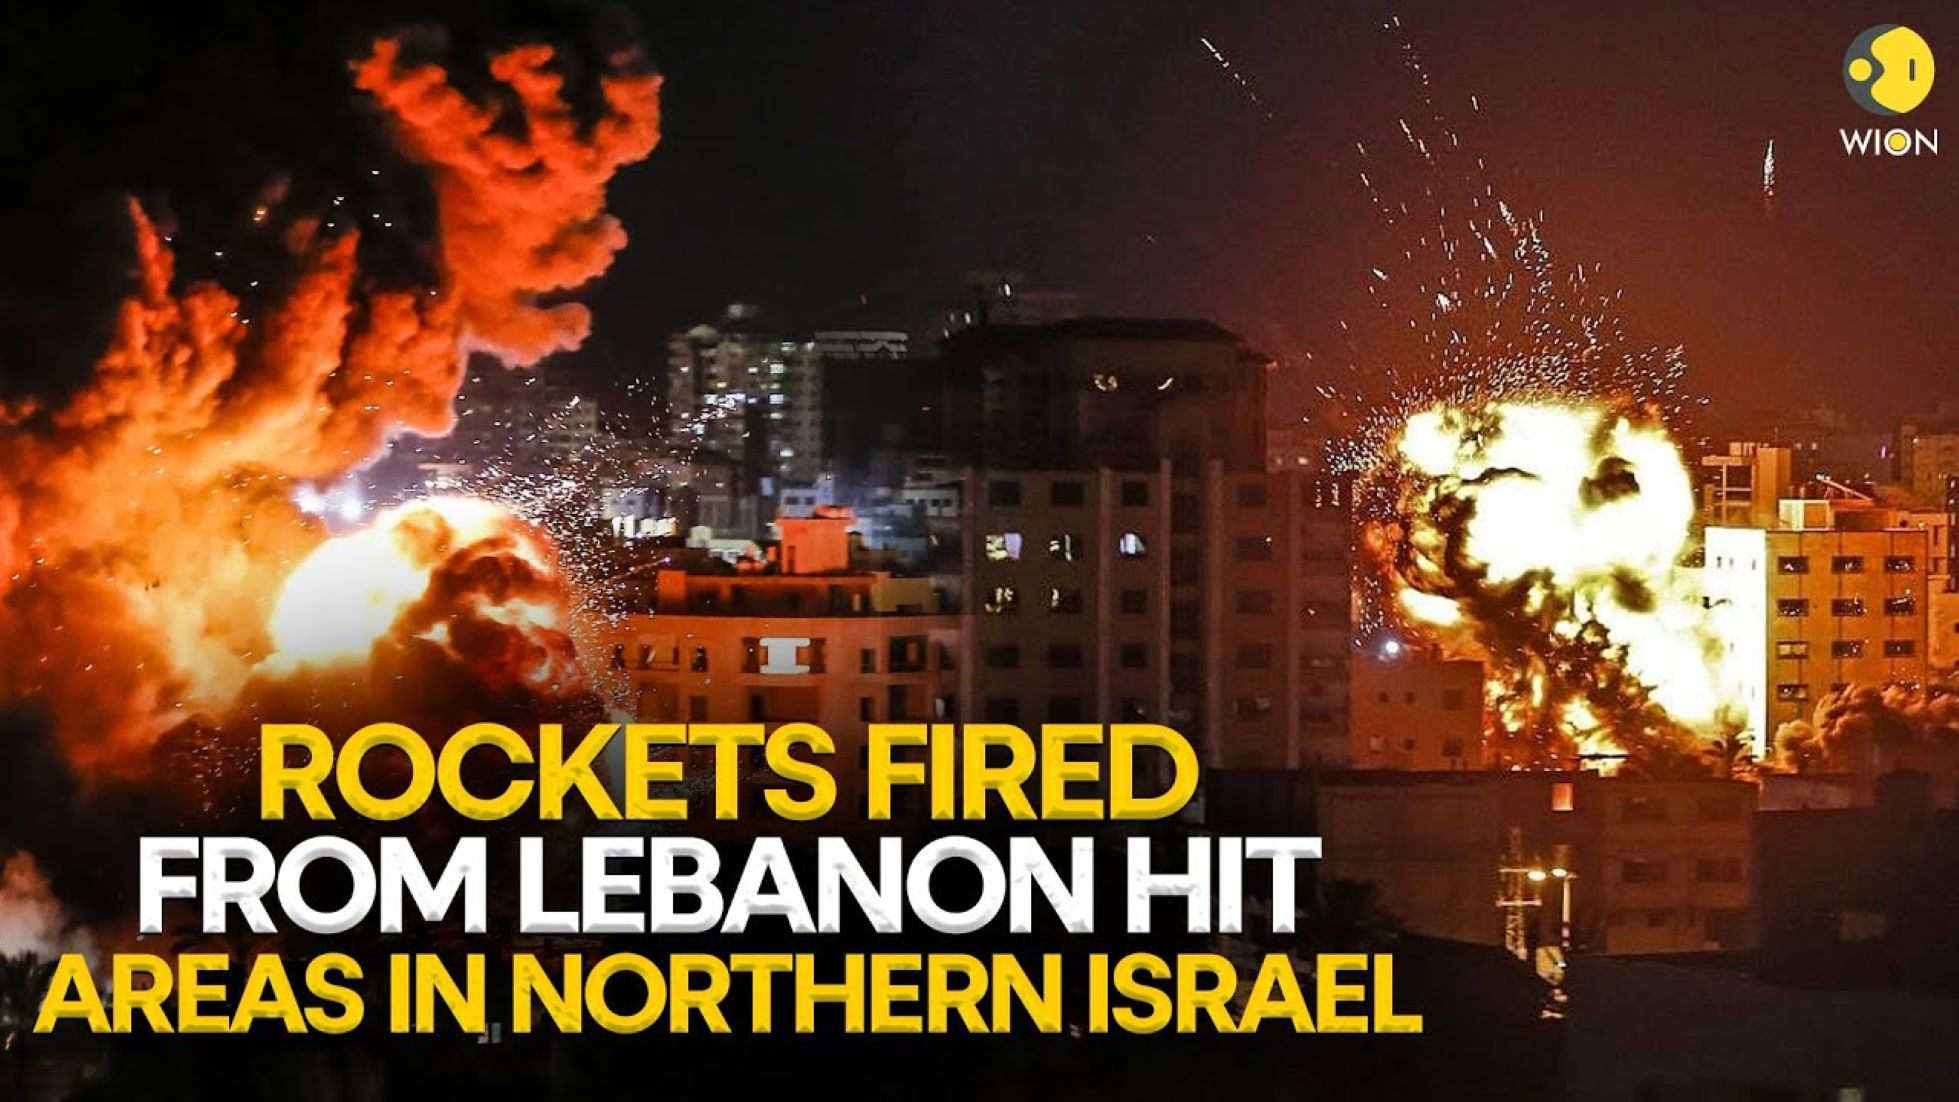 30 Rockets Fired From Lebanon At N. Israel: Army